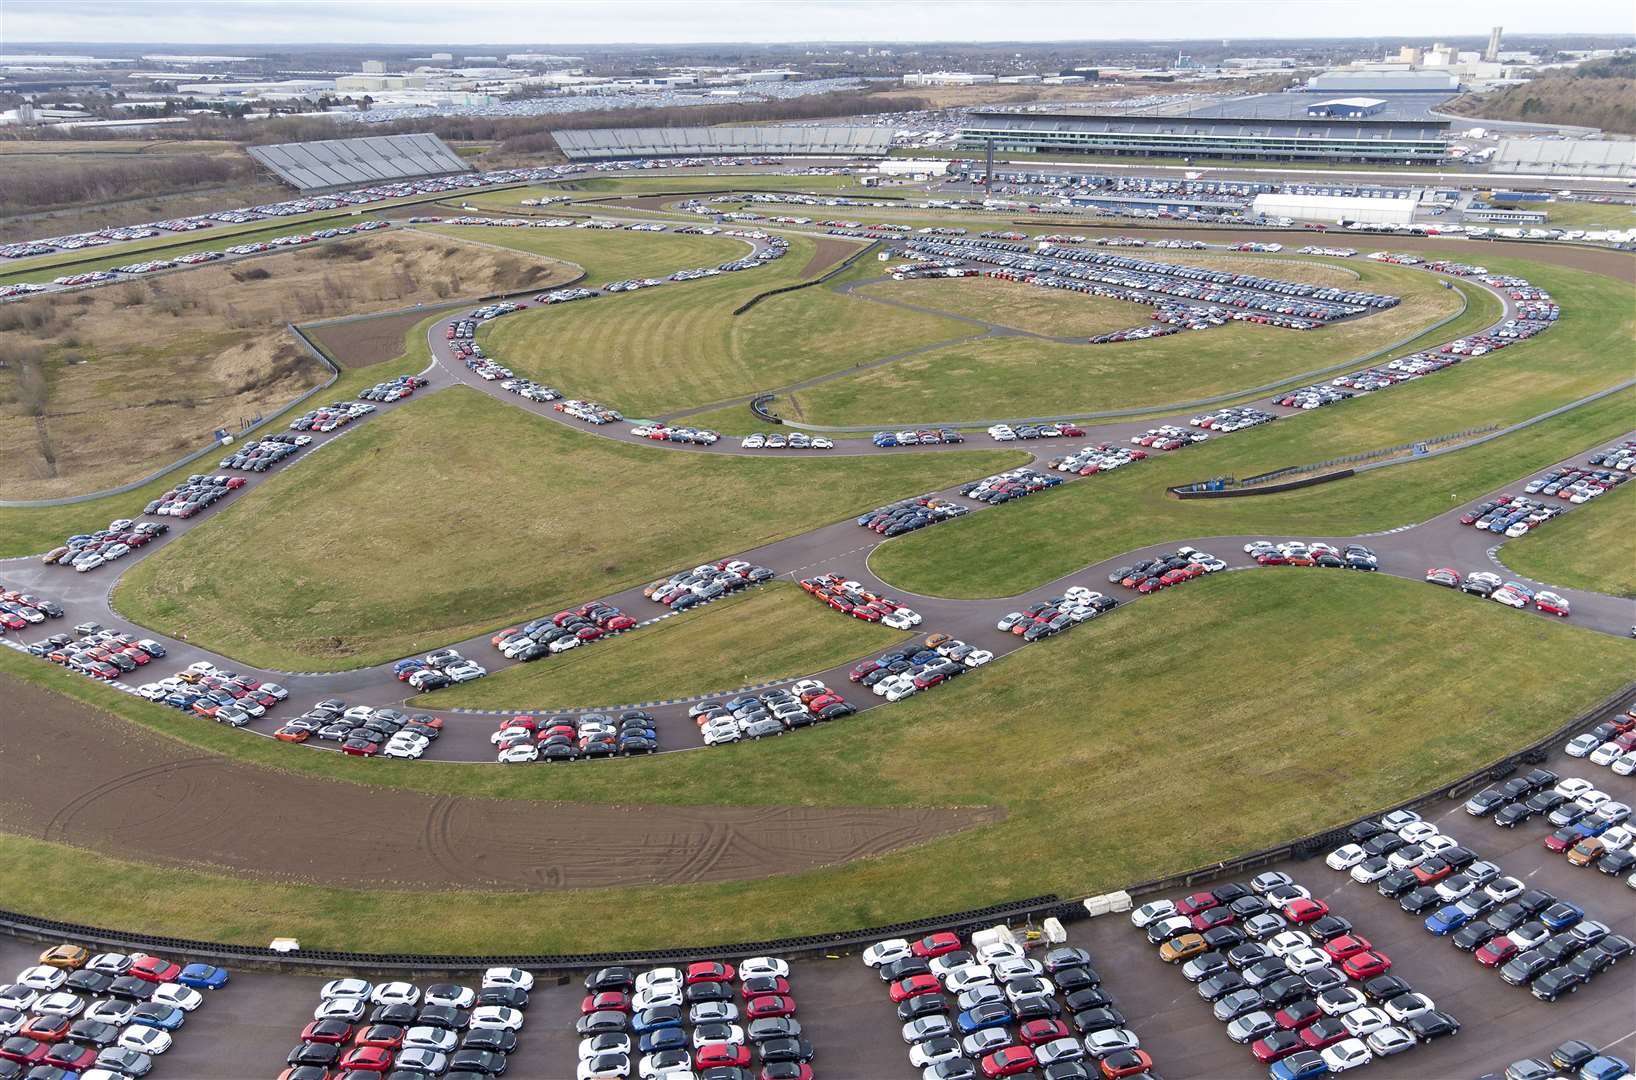 Used cars parked on the 250-acre former motorsport site (Joe Giddens/PA)